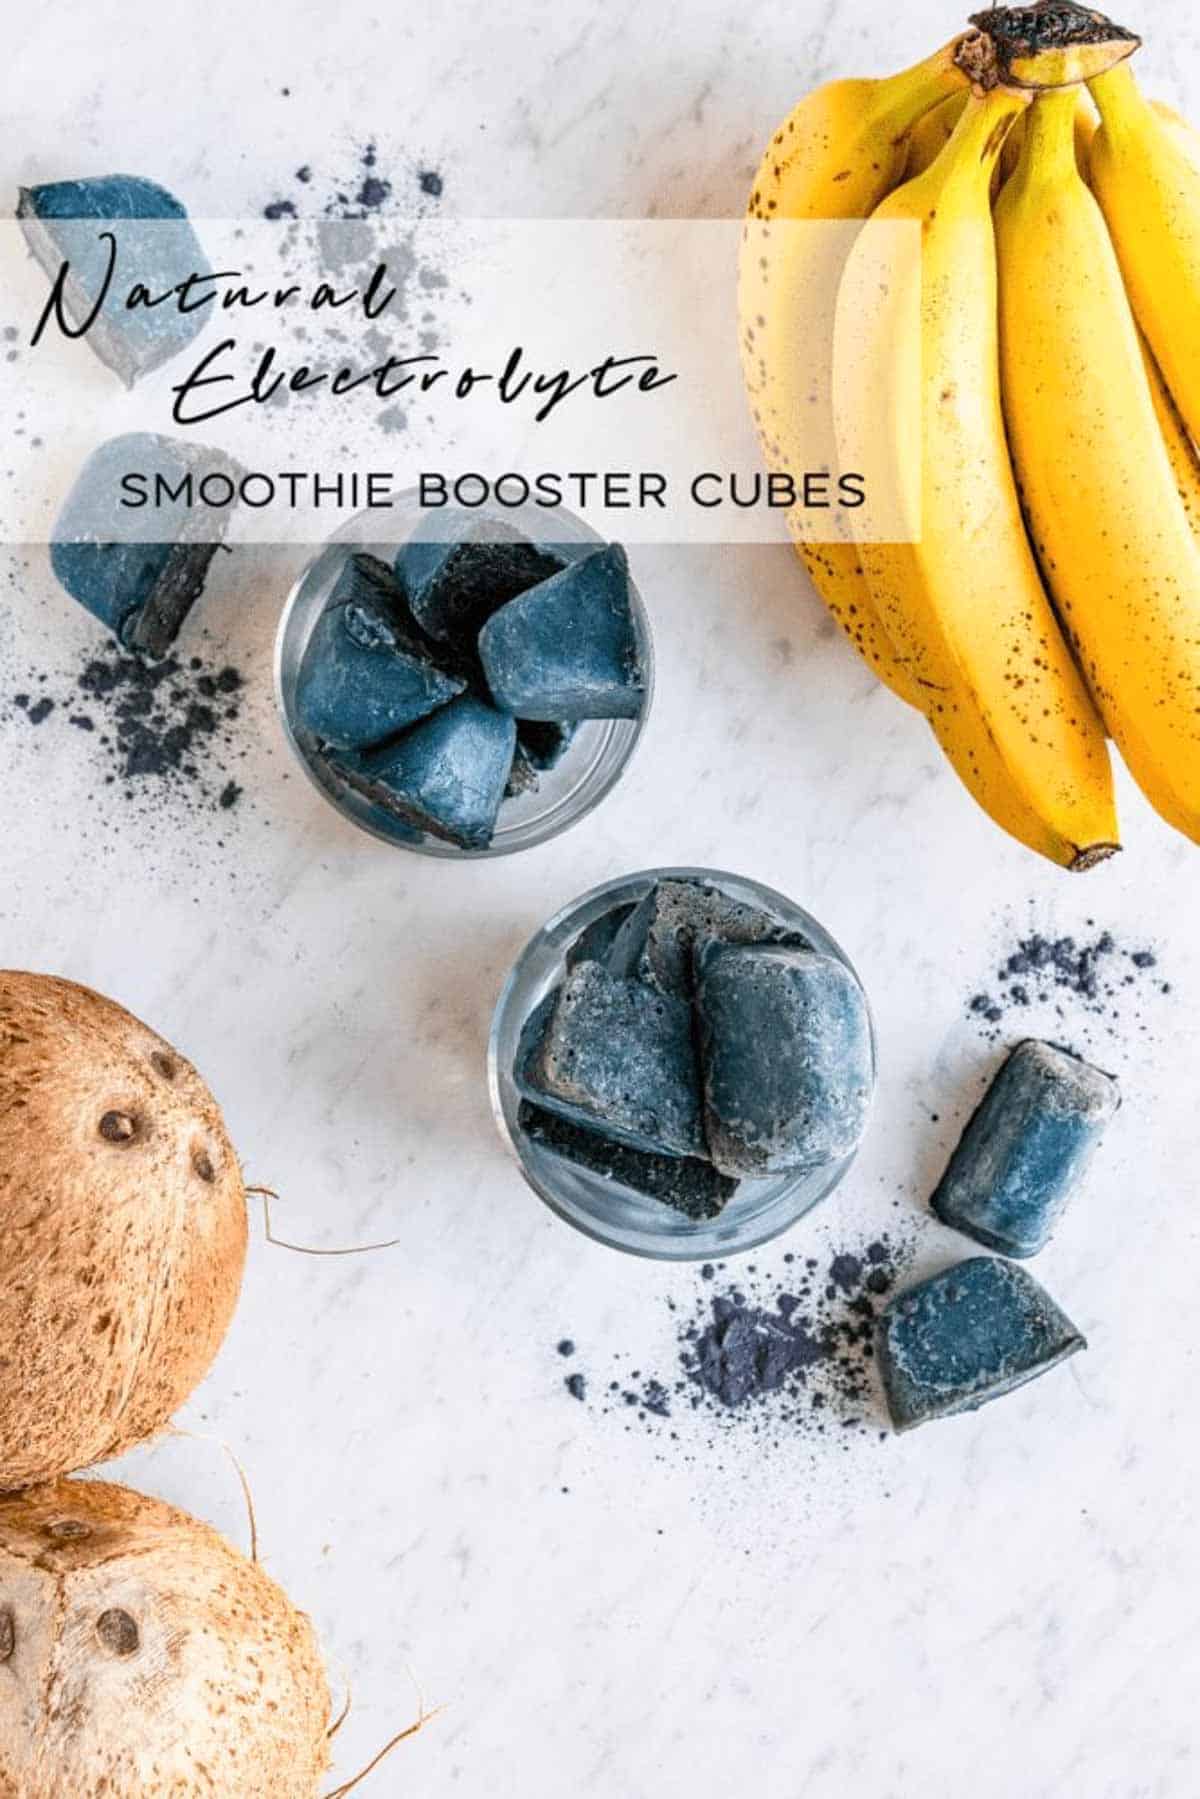 Natural electrolyte smoothie booster cubes